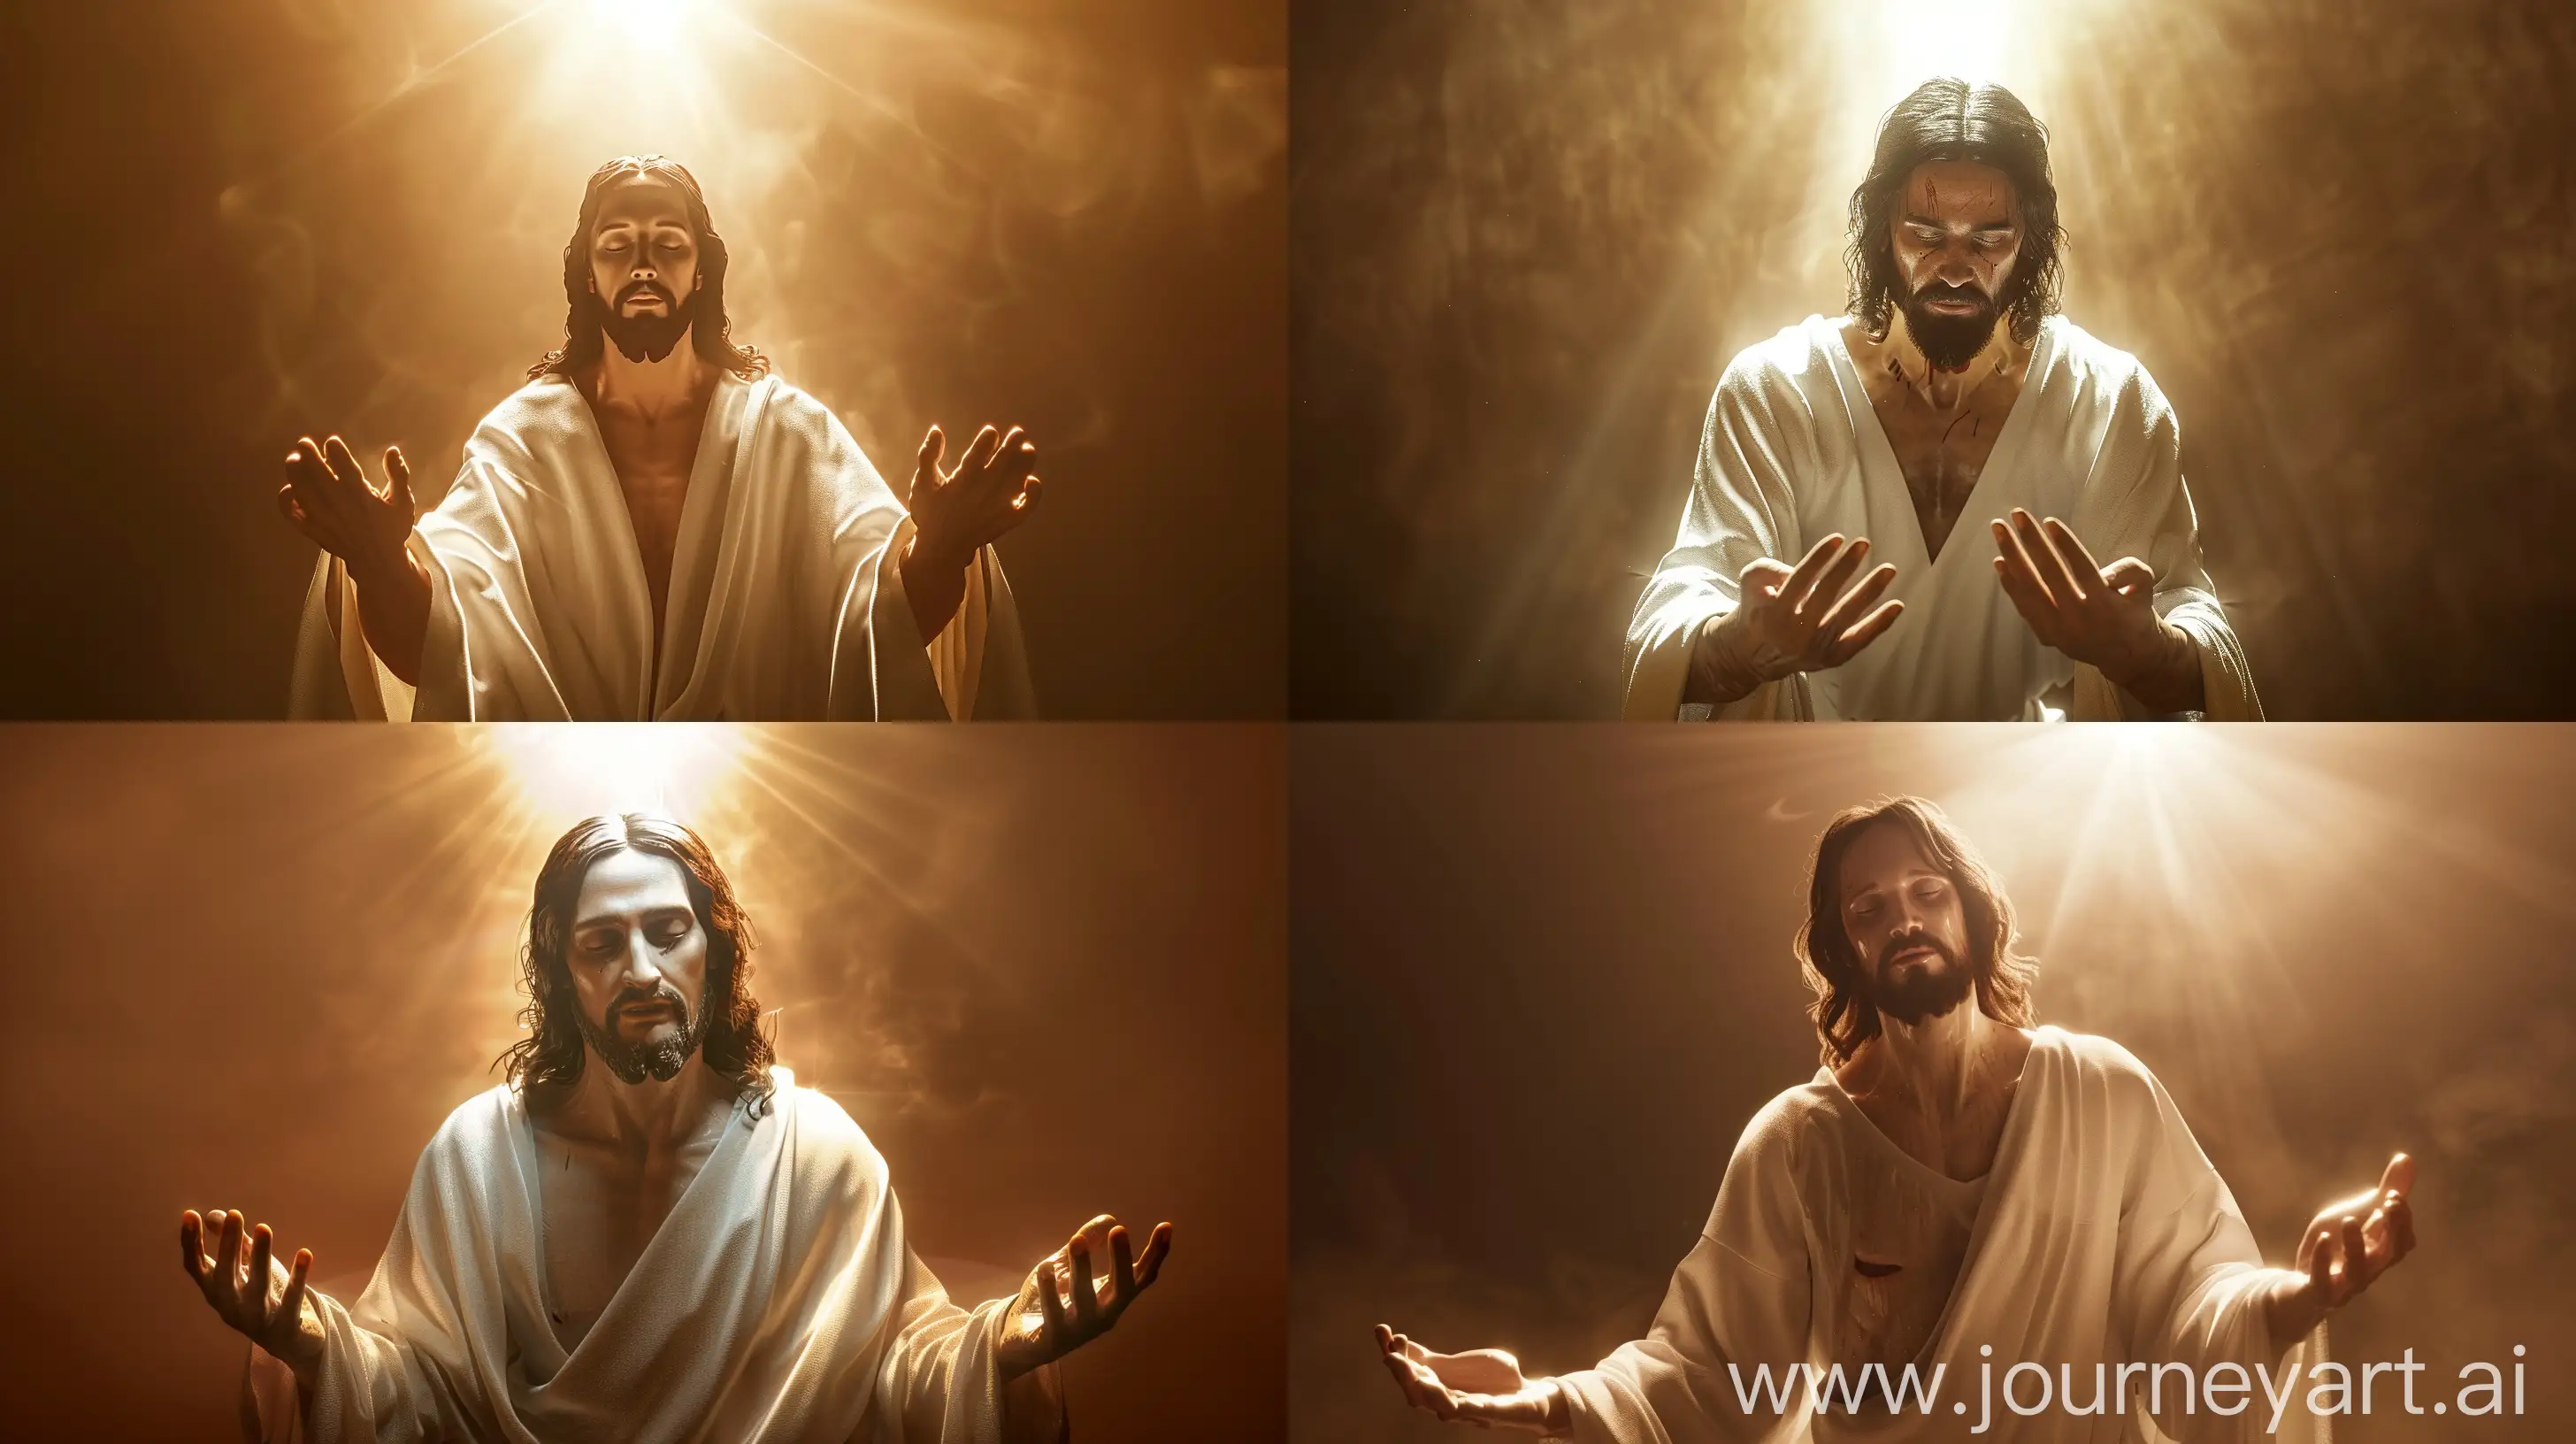 photorealistic Jesus, Jesus is holding out his hands, Jesus full face, dressed in a white robe, Jesus is surrounded by light, the background is a warm brown color, with a bright light shining from above, ultrarealistic, detailed, shot on Canon EOS R6, —ar 16:9